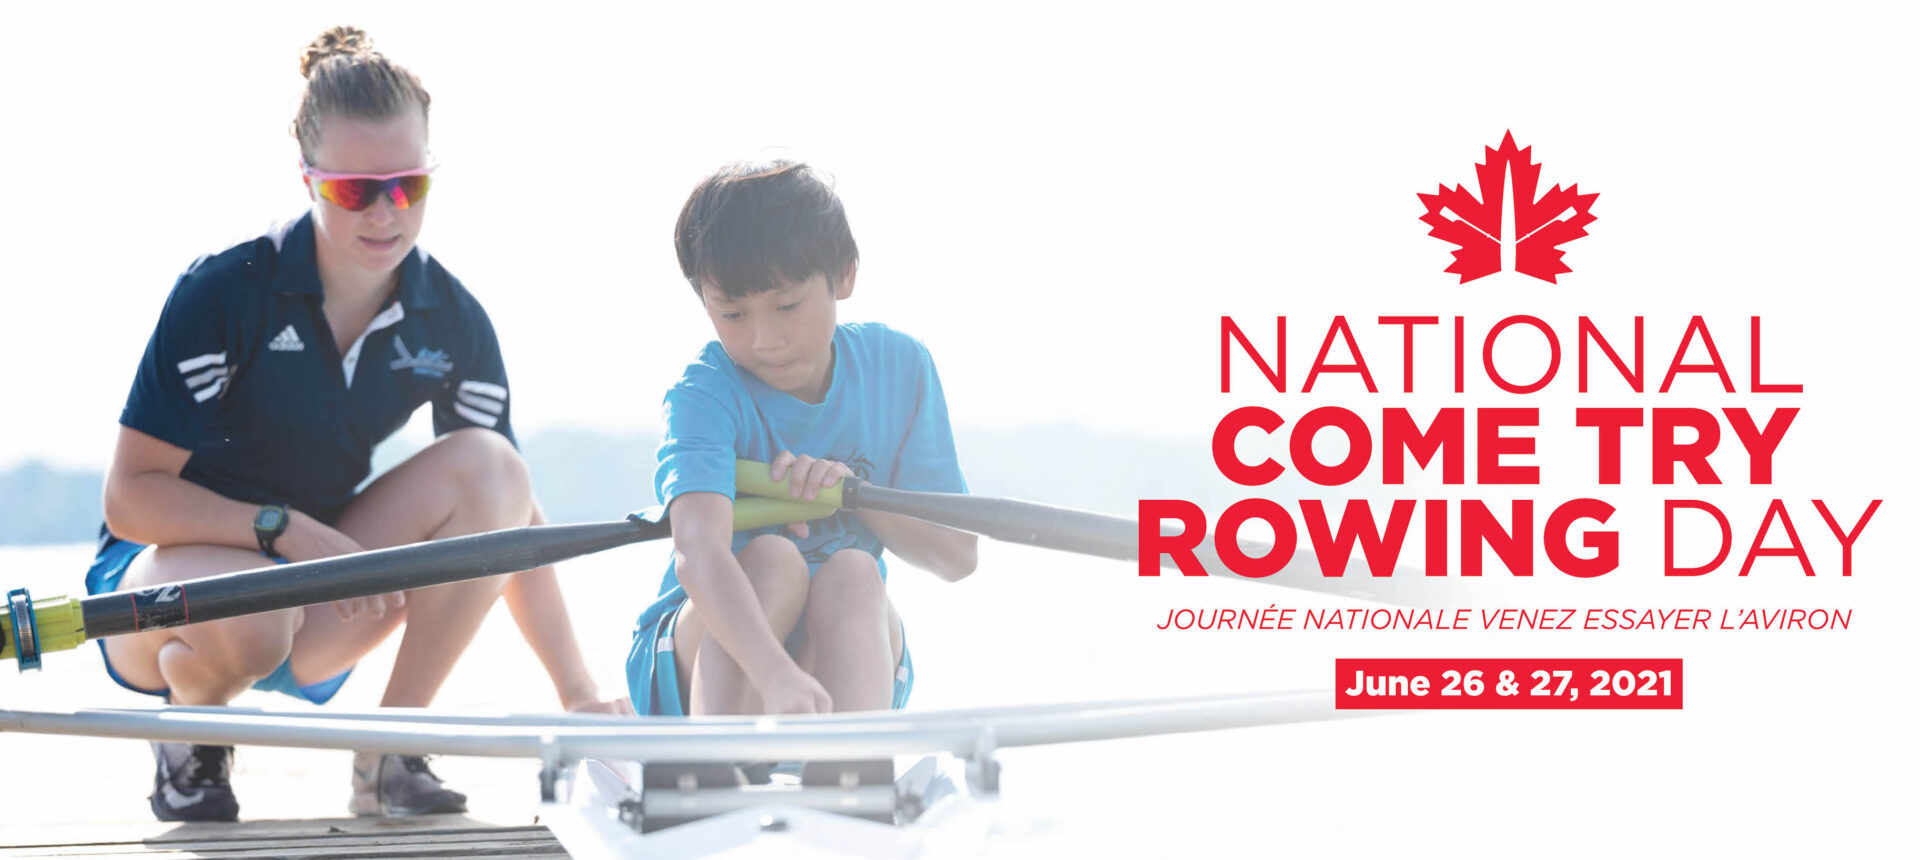 Join us for National Come Try Rowing Day